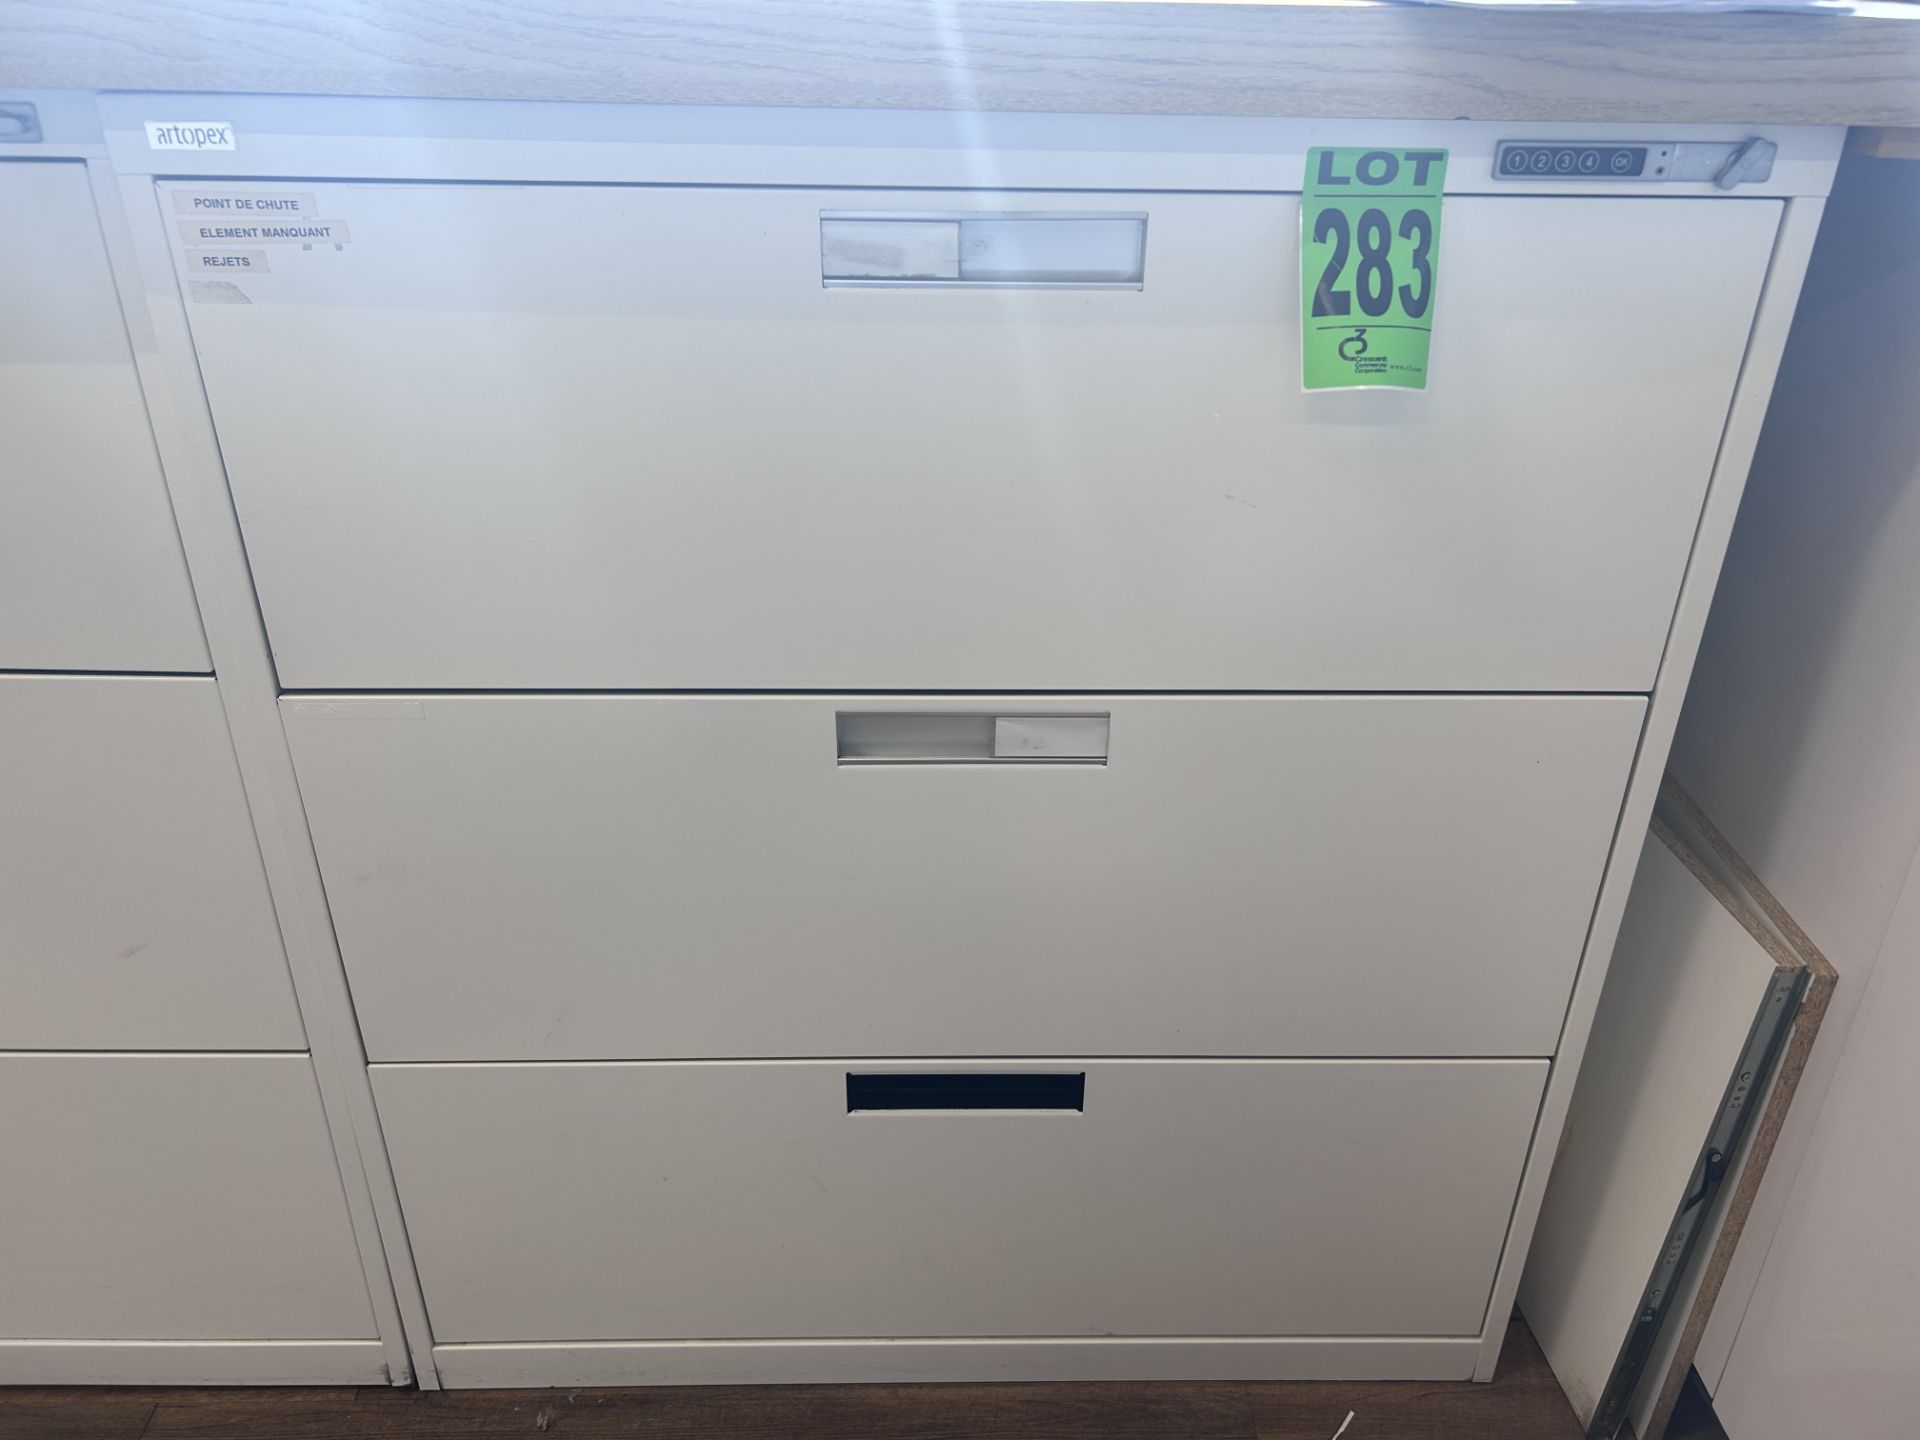 ARTOPEX 3-Drawer filing cabinet with numerical lock